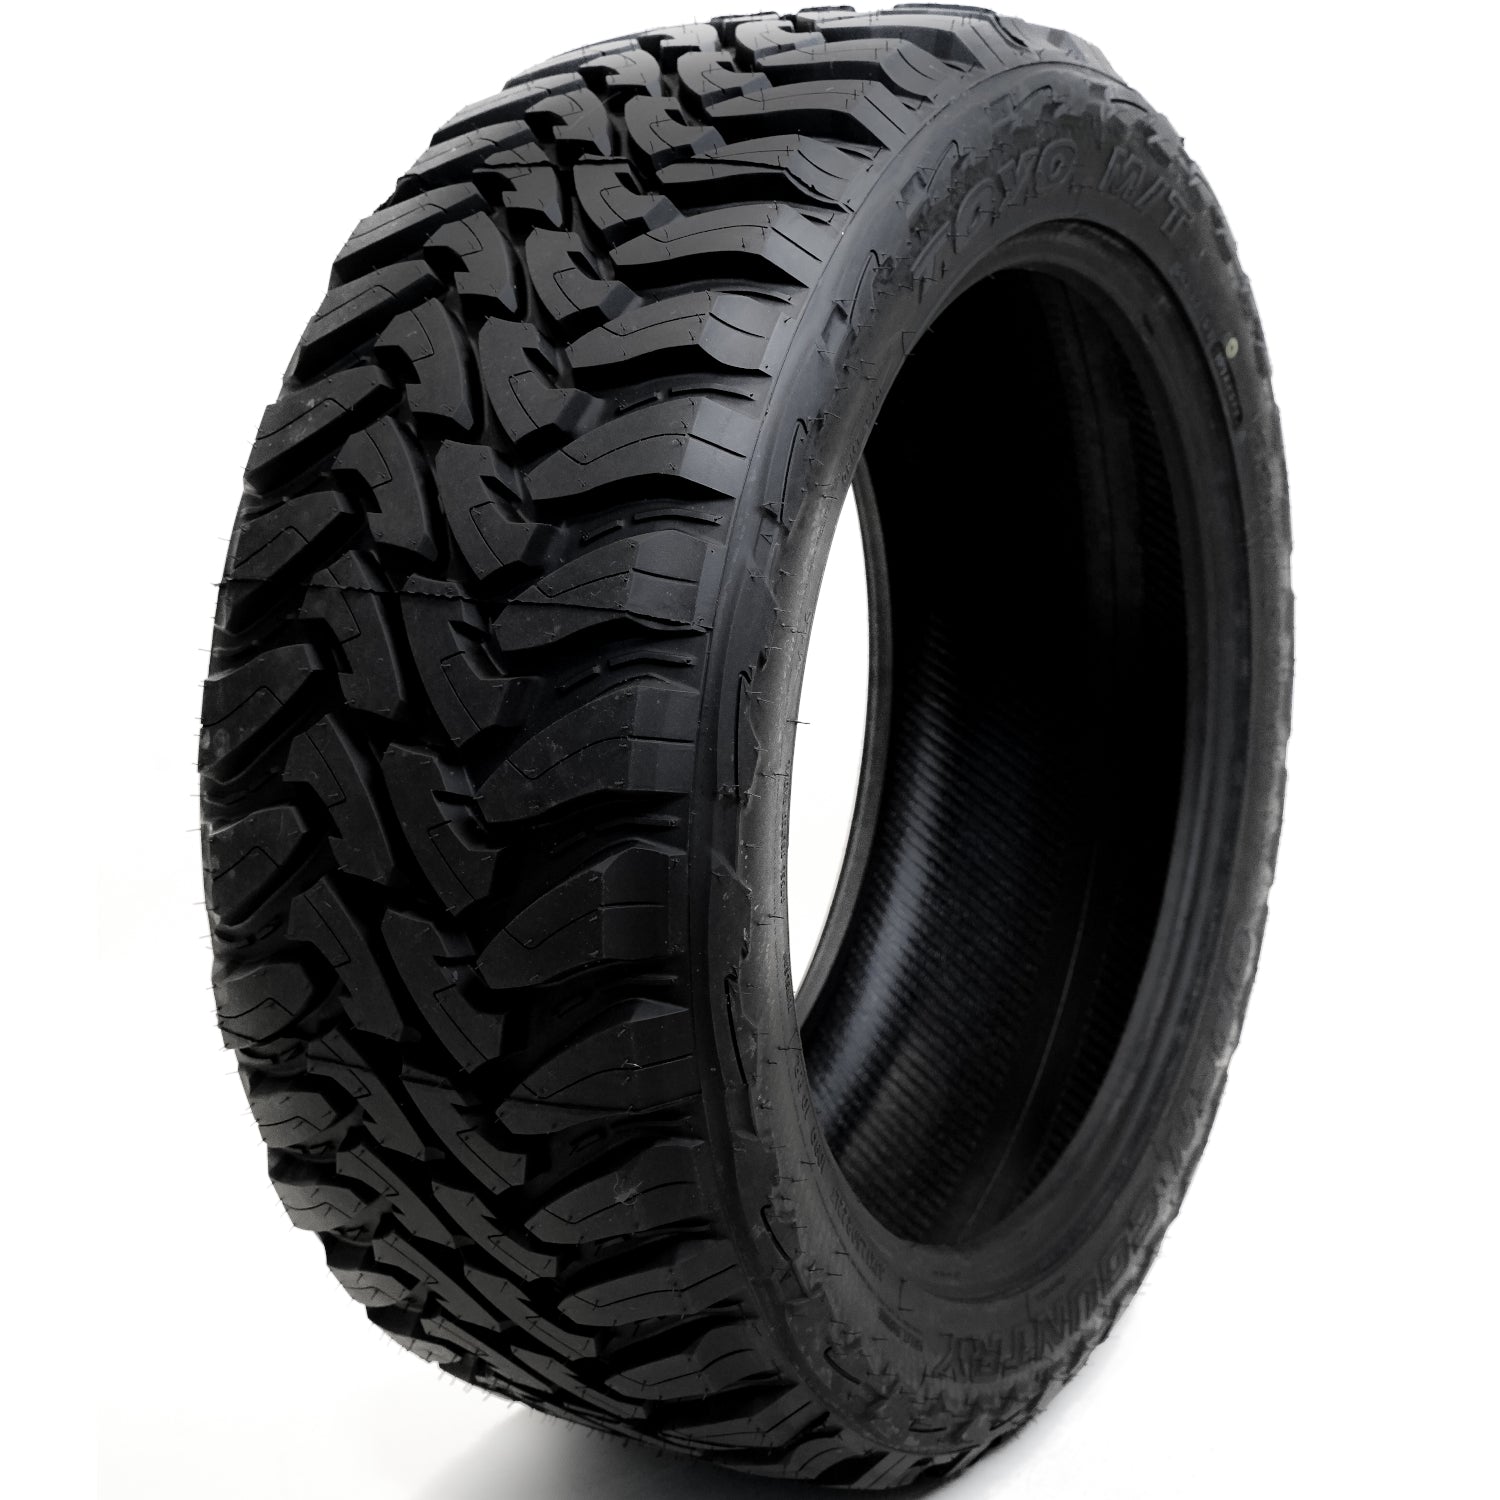 TOYO TIRES OPEN COUNTRY M/T LT295/65R20 (35.4X11.8R 20) Tires